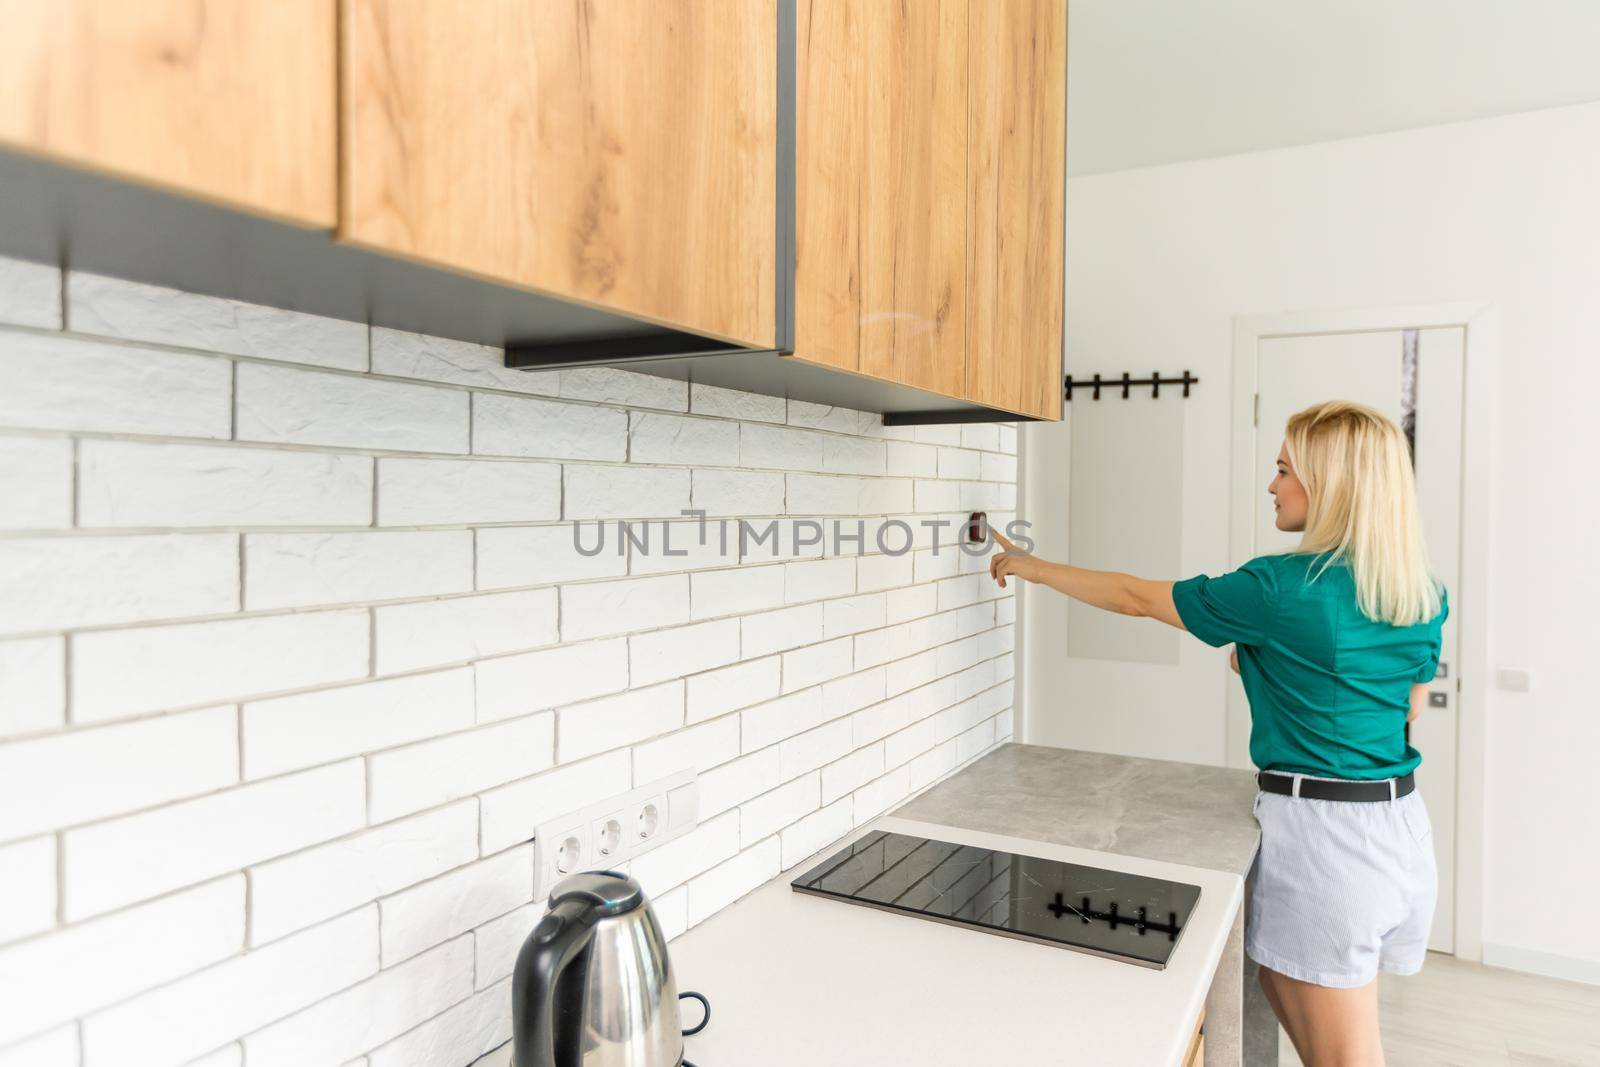 A woman is pressing the up button of a wall attached house thermostat with digital display showing the temperature. A concept image for electricity bill, heating, cooling, eco friendly, saving etc.